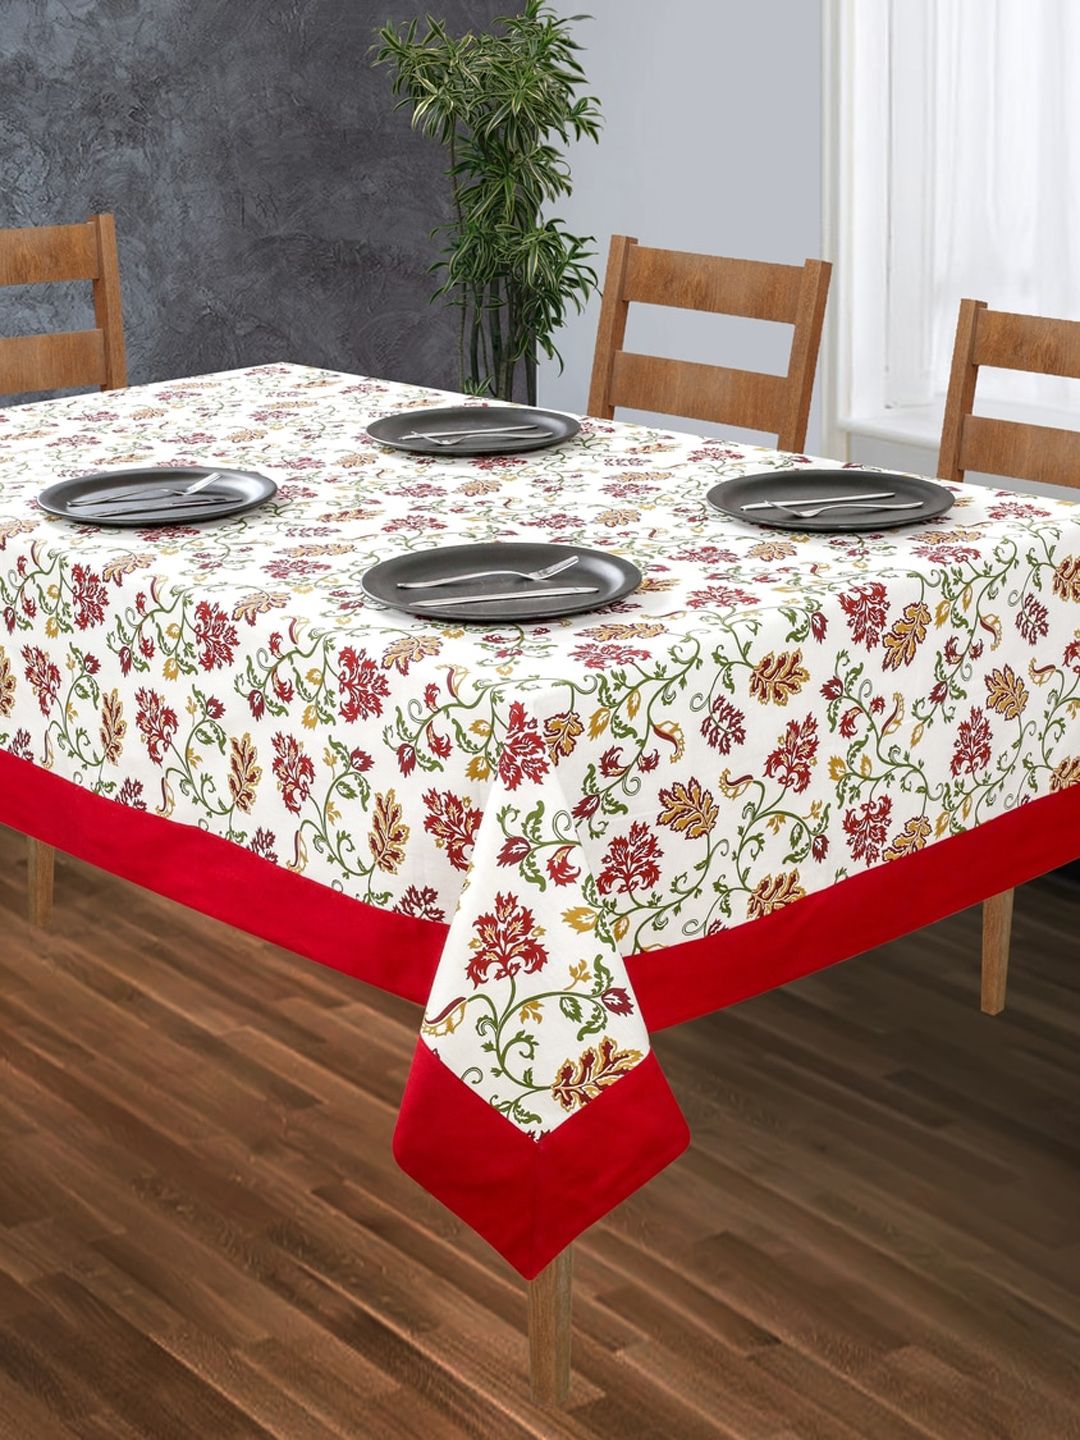 SHADES of LIFE Red & White Printed Cotton 6-Seater Table Cover Price in India